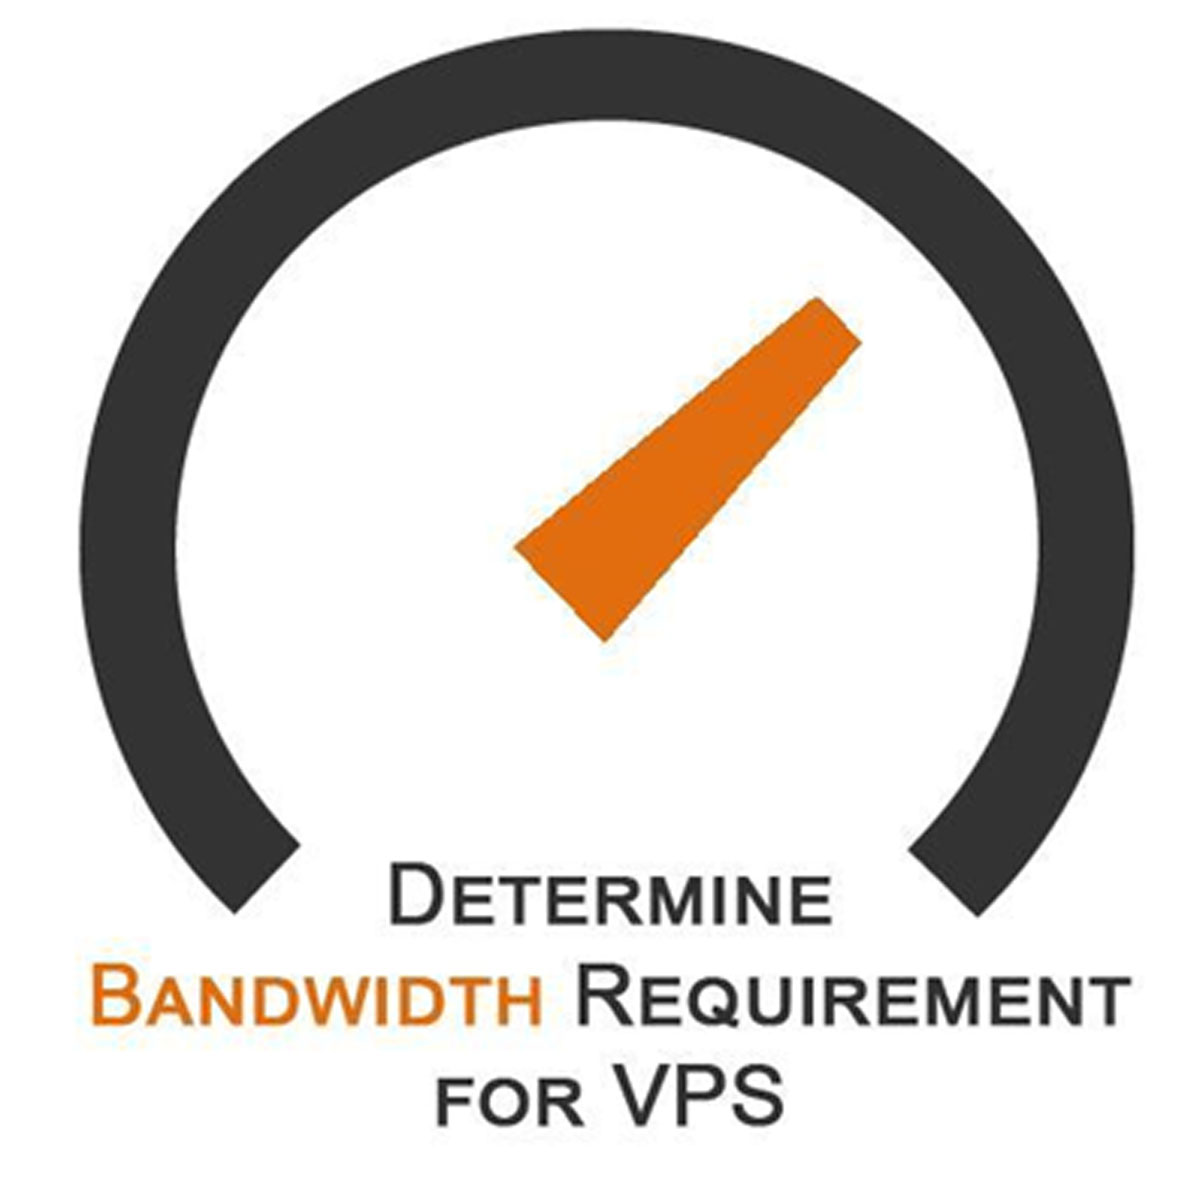 How to Determine the Amount of Bandwidth Requirement for My VPS?